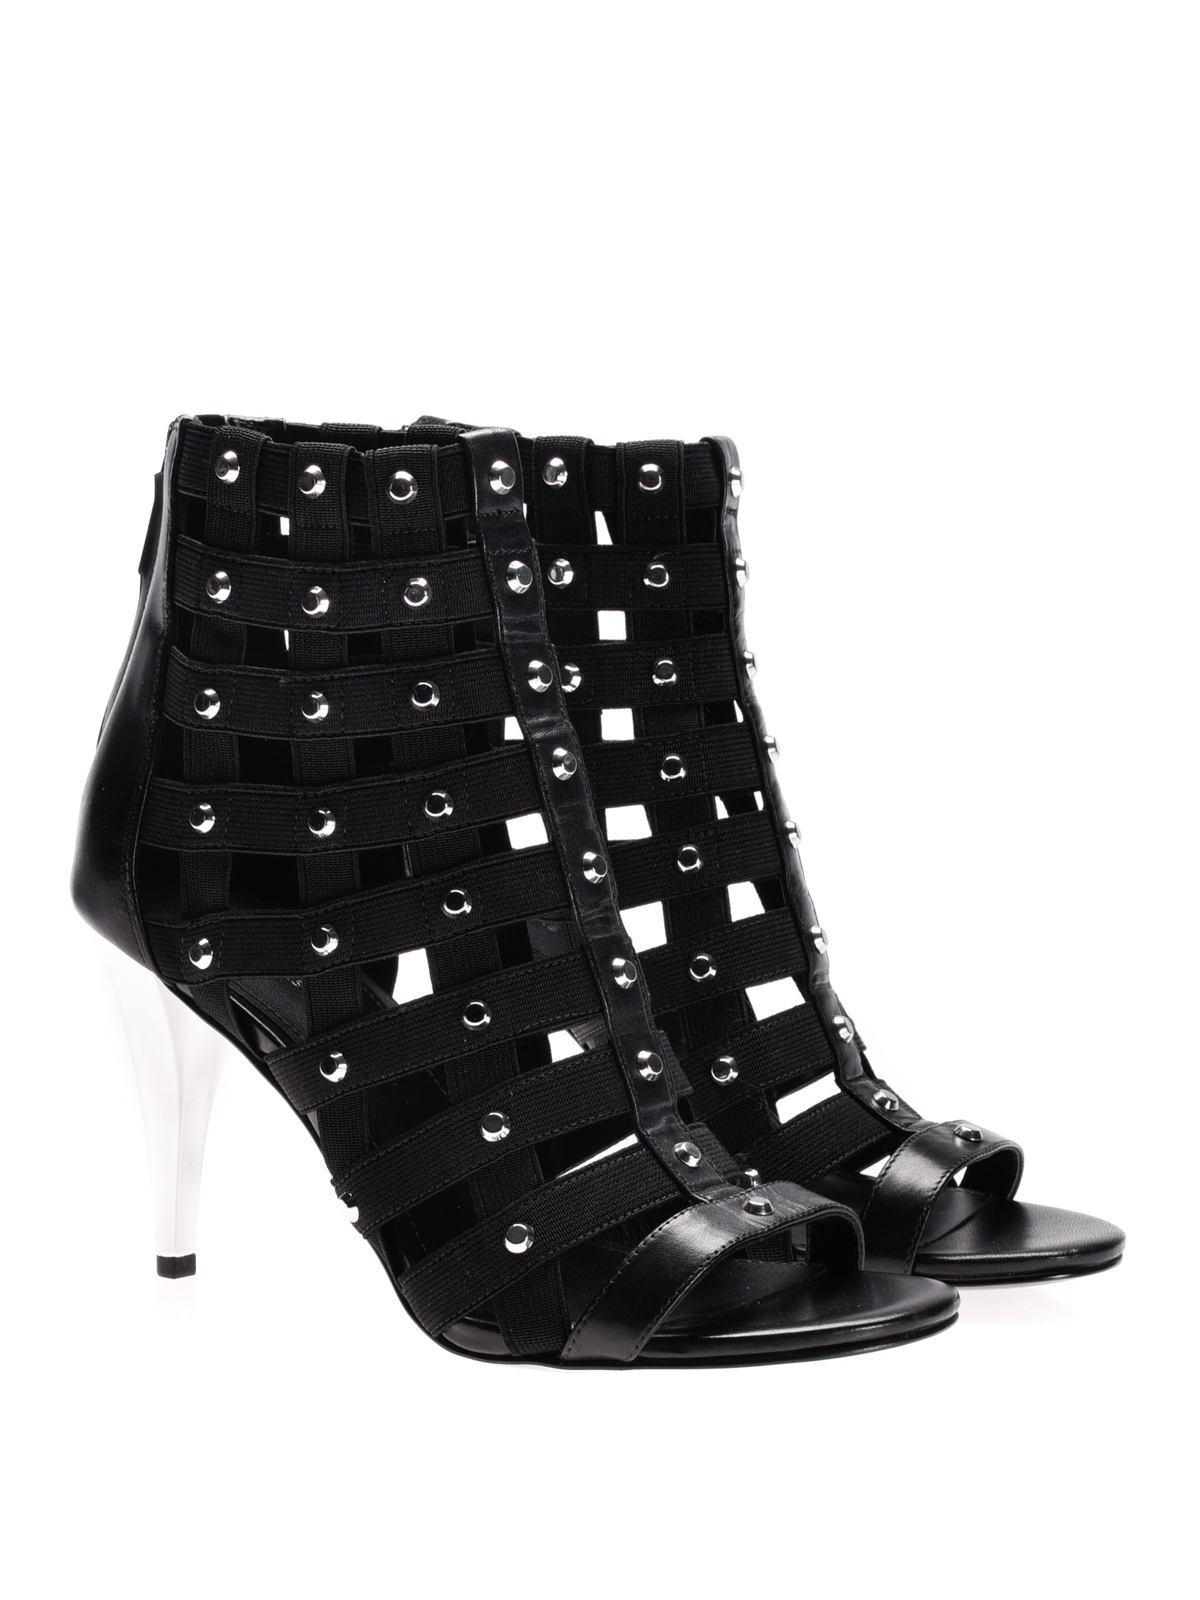 sherry studded leather caged sandal